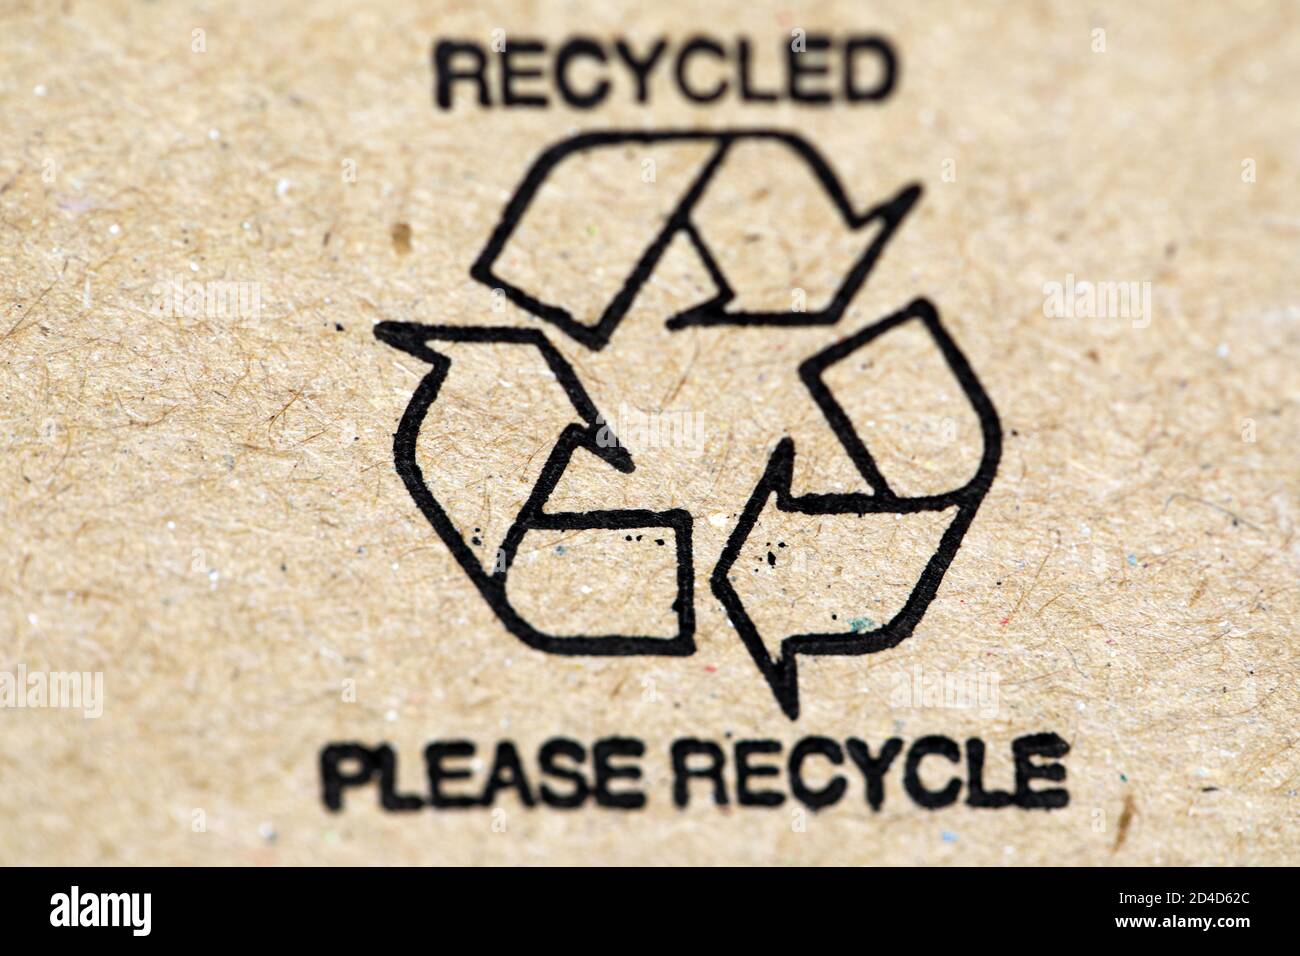 Please recycle logo on a cardboard box Stock Photo